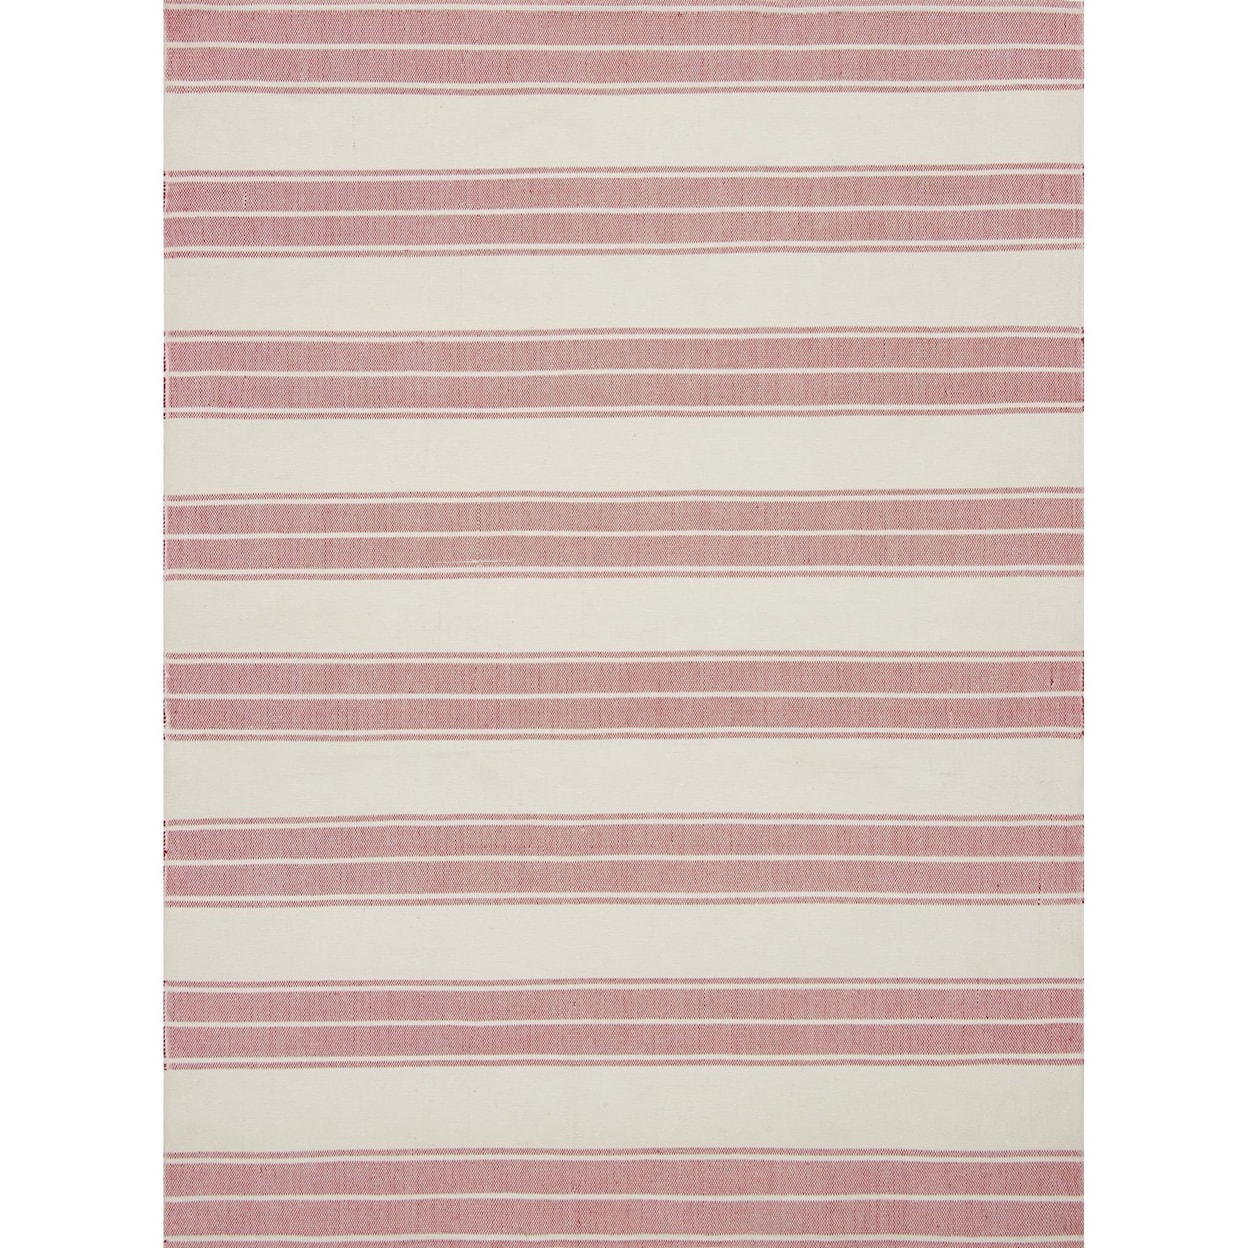 Magnolia Home by Joanna Gaines for Loloi Carter 5' 0" x 7' 6" Rectangle Rug